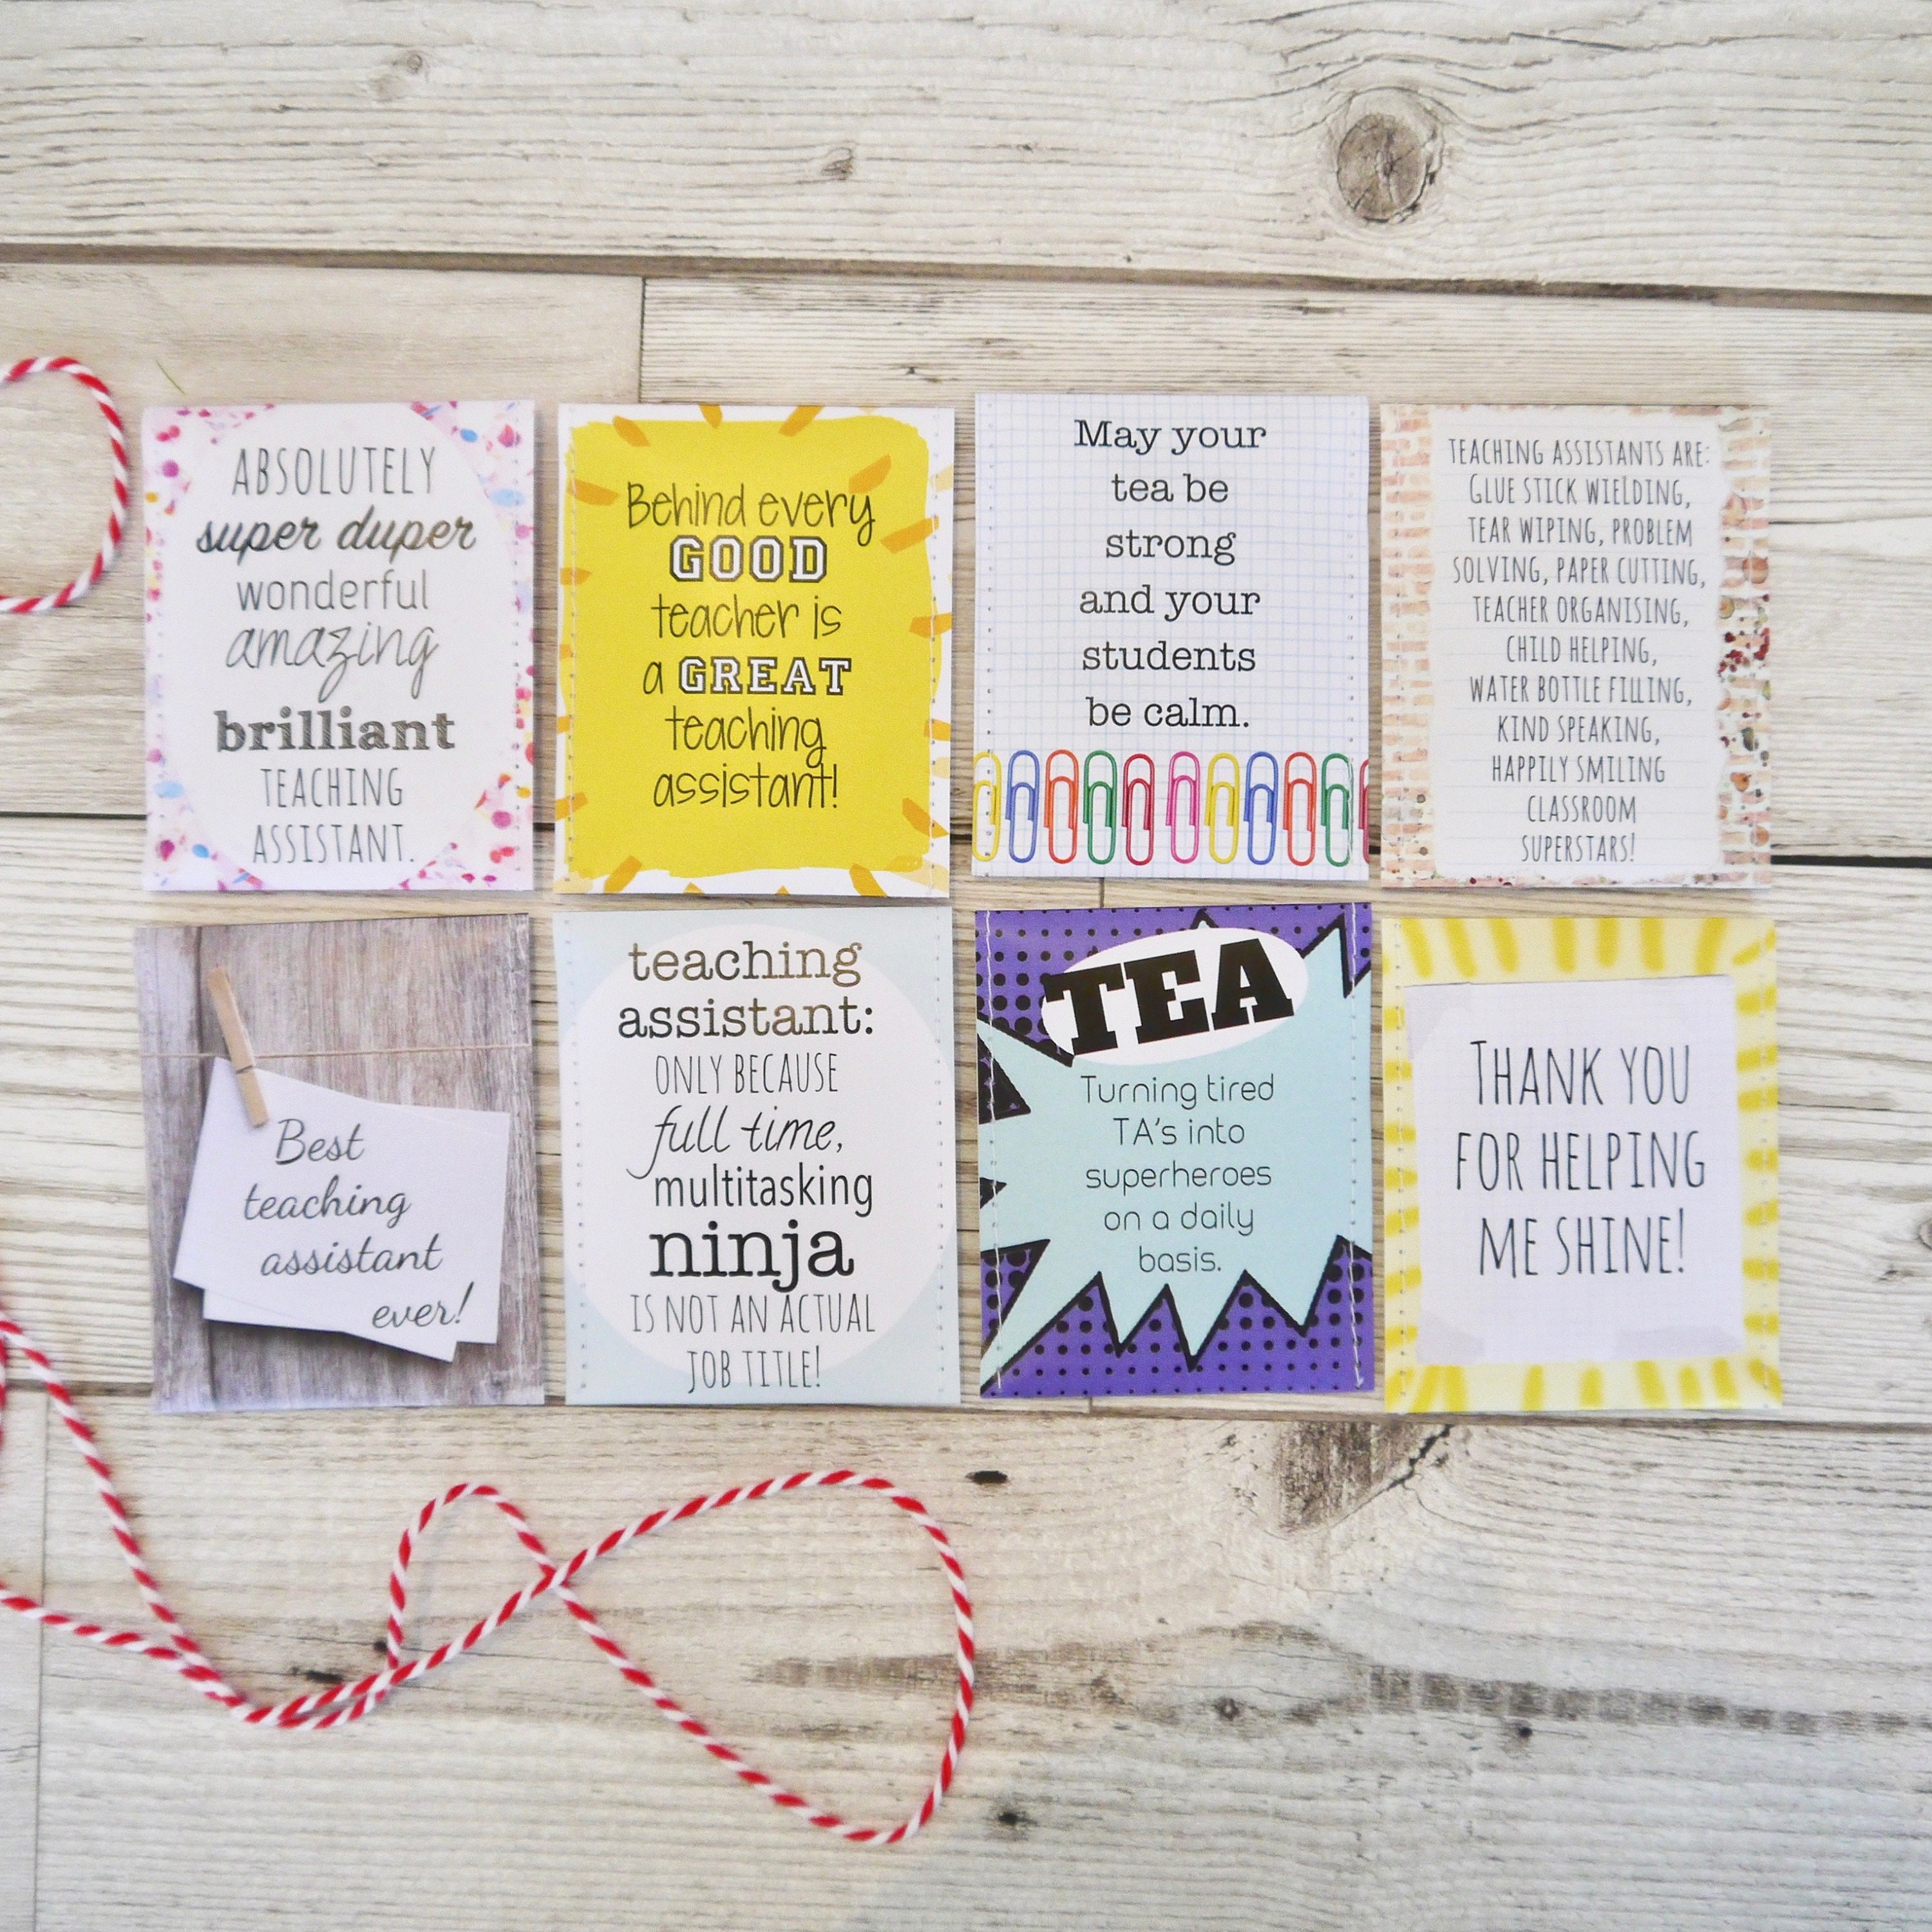 Book Lover Gift: tea Gift for Bookworms Bookish Gifts Literary Gifts  Literary Tea Gifts for Readers Book Nerd Gifts 